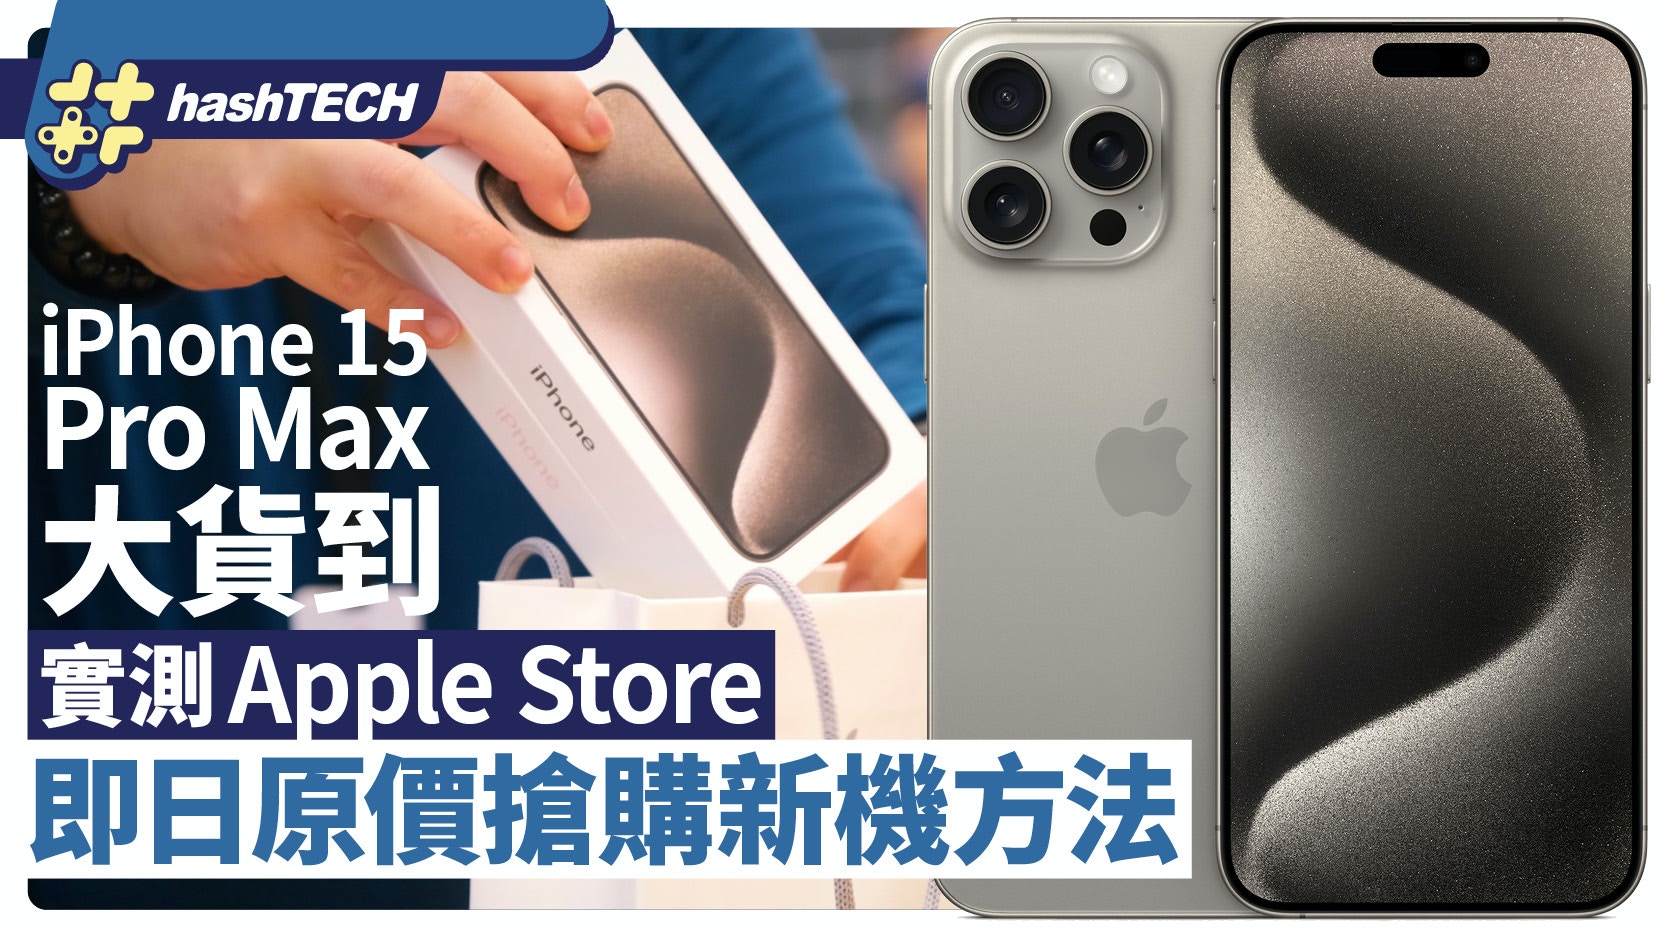 How to Buy iPhone 15 Pro Max at Apple Store Today – Step-by-Step Guide